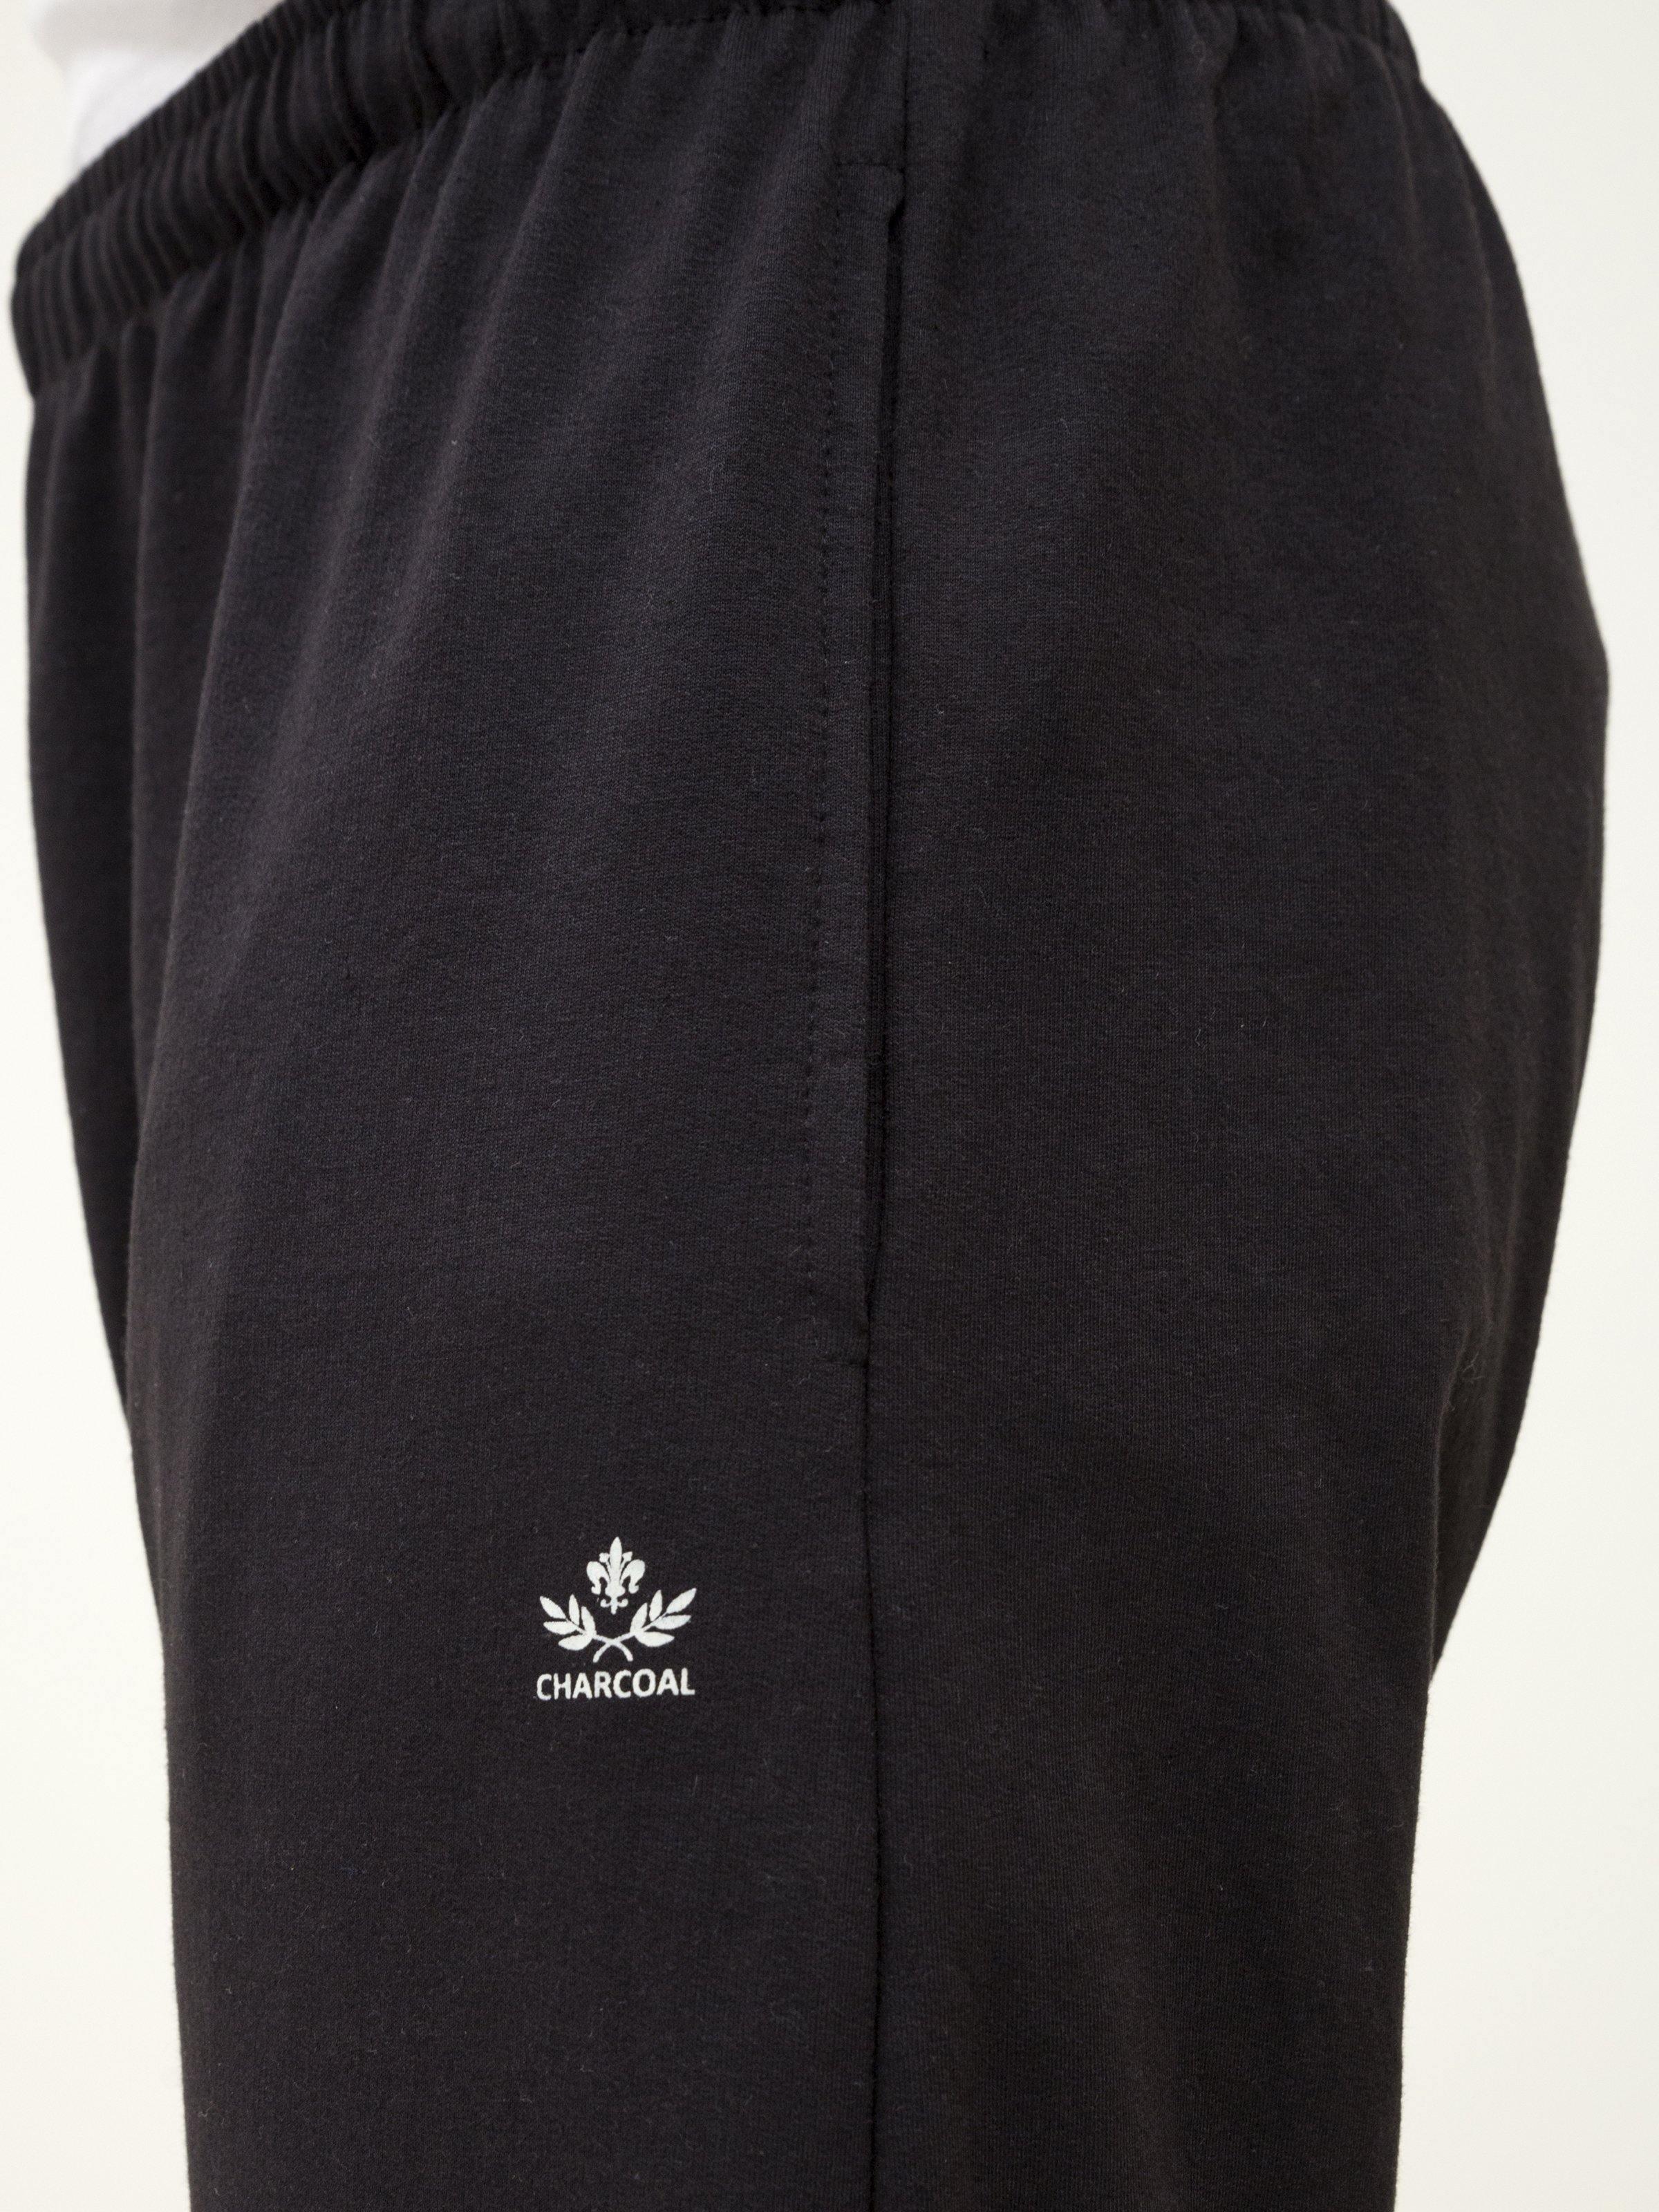 CASUAL TROUSER KNITE SLEEPWEAR BLACK at Charcoal Clothing